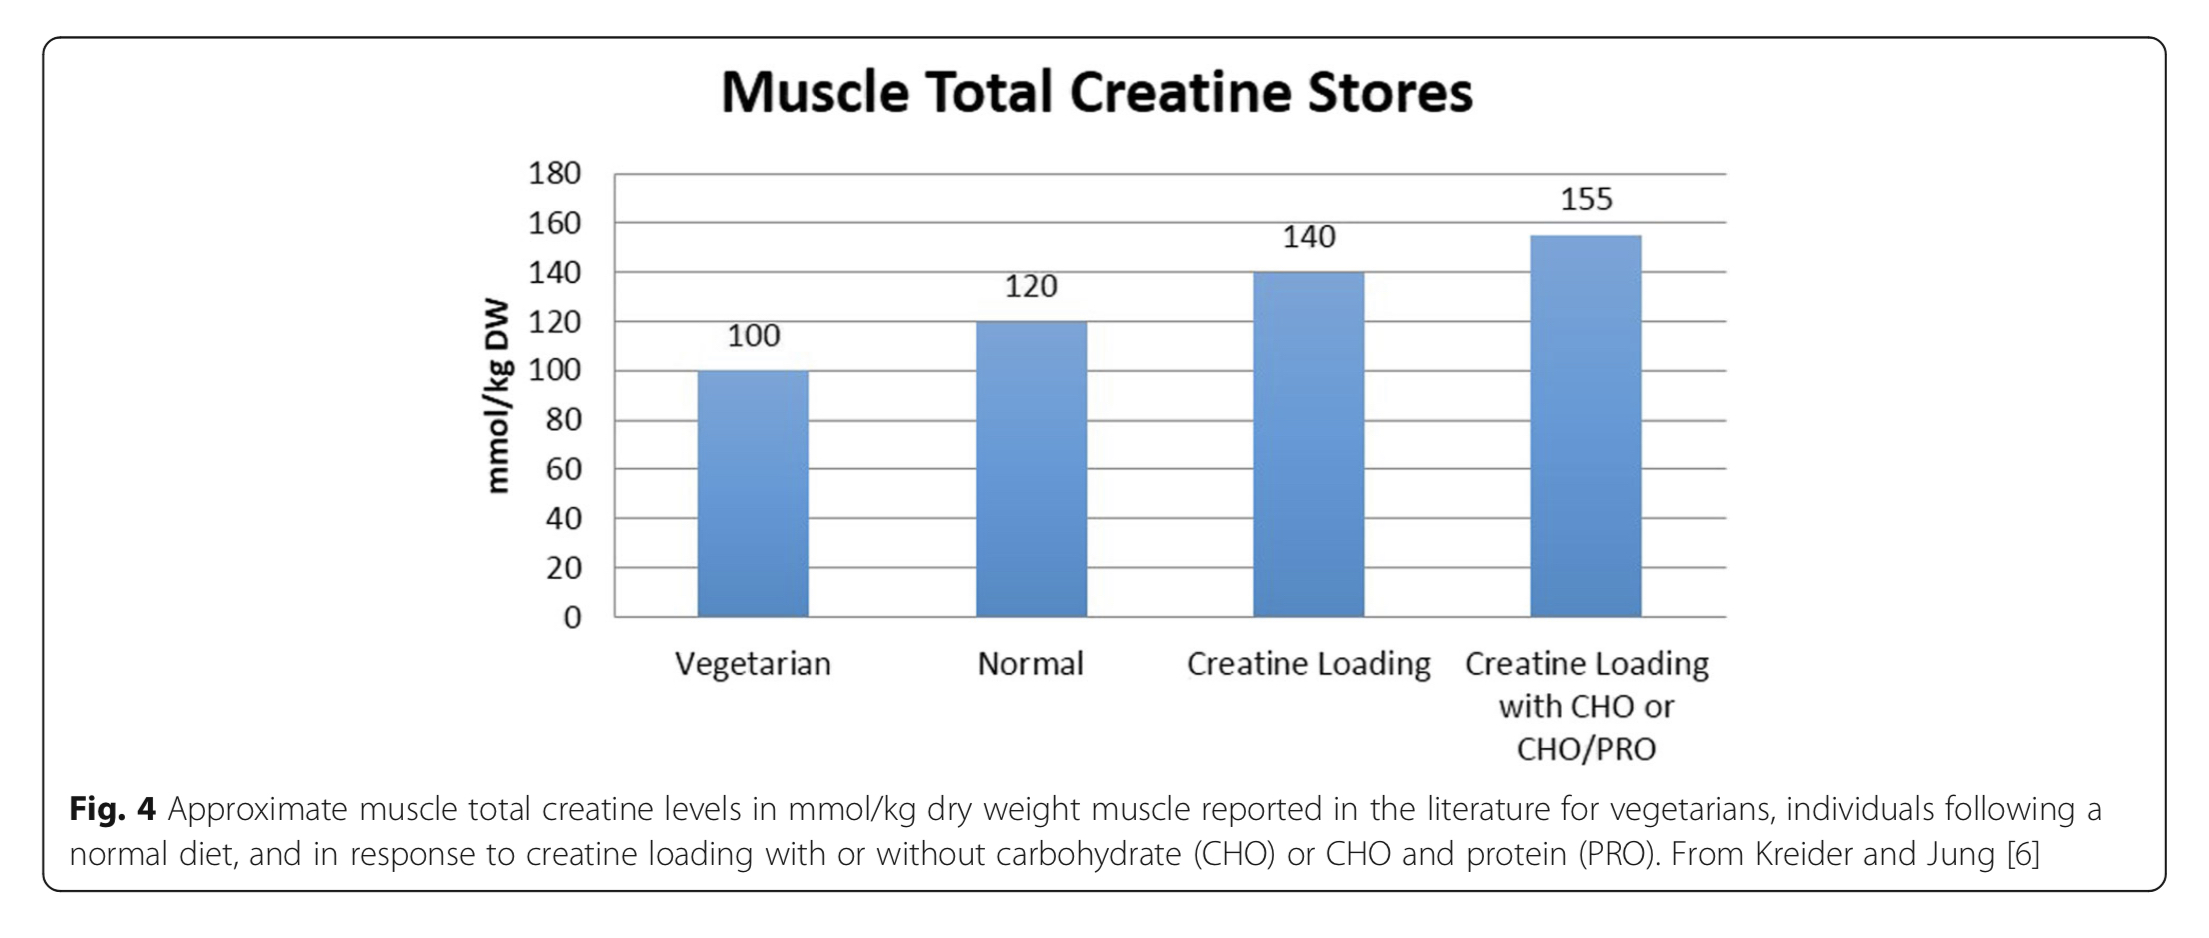 To show the differences in creatine uptake in muscle following supplementation in vegetarian, normal, creatine loading and creatine loading with cho or cho/pro